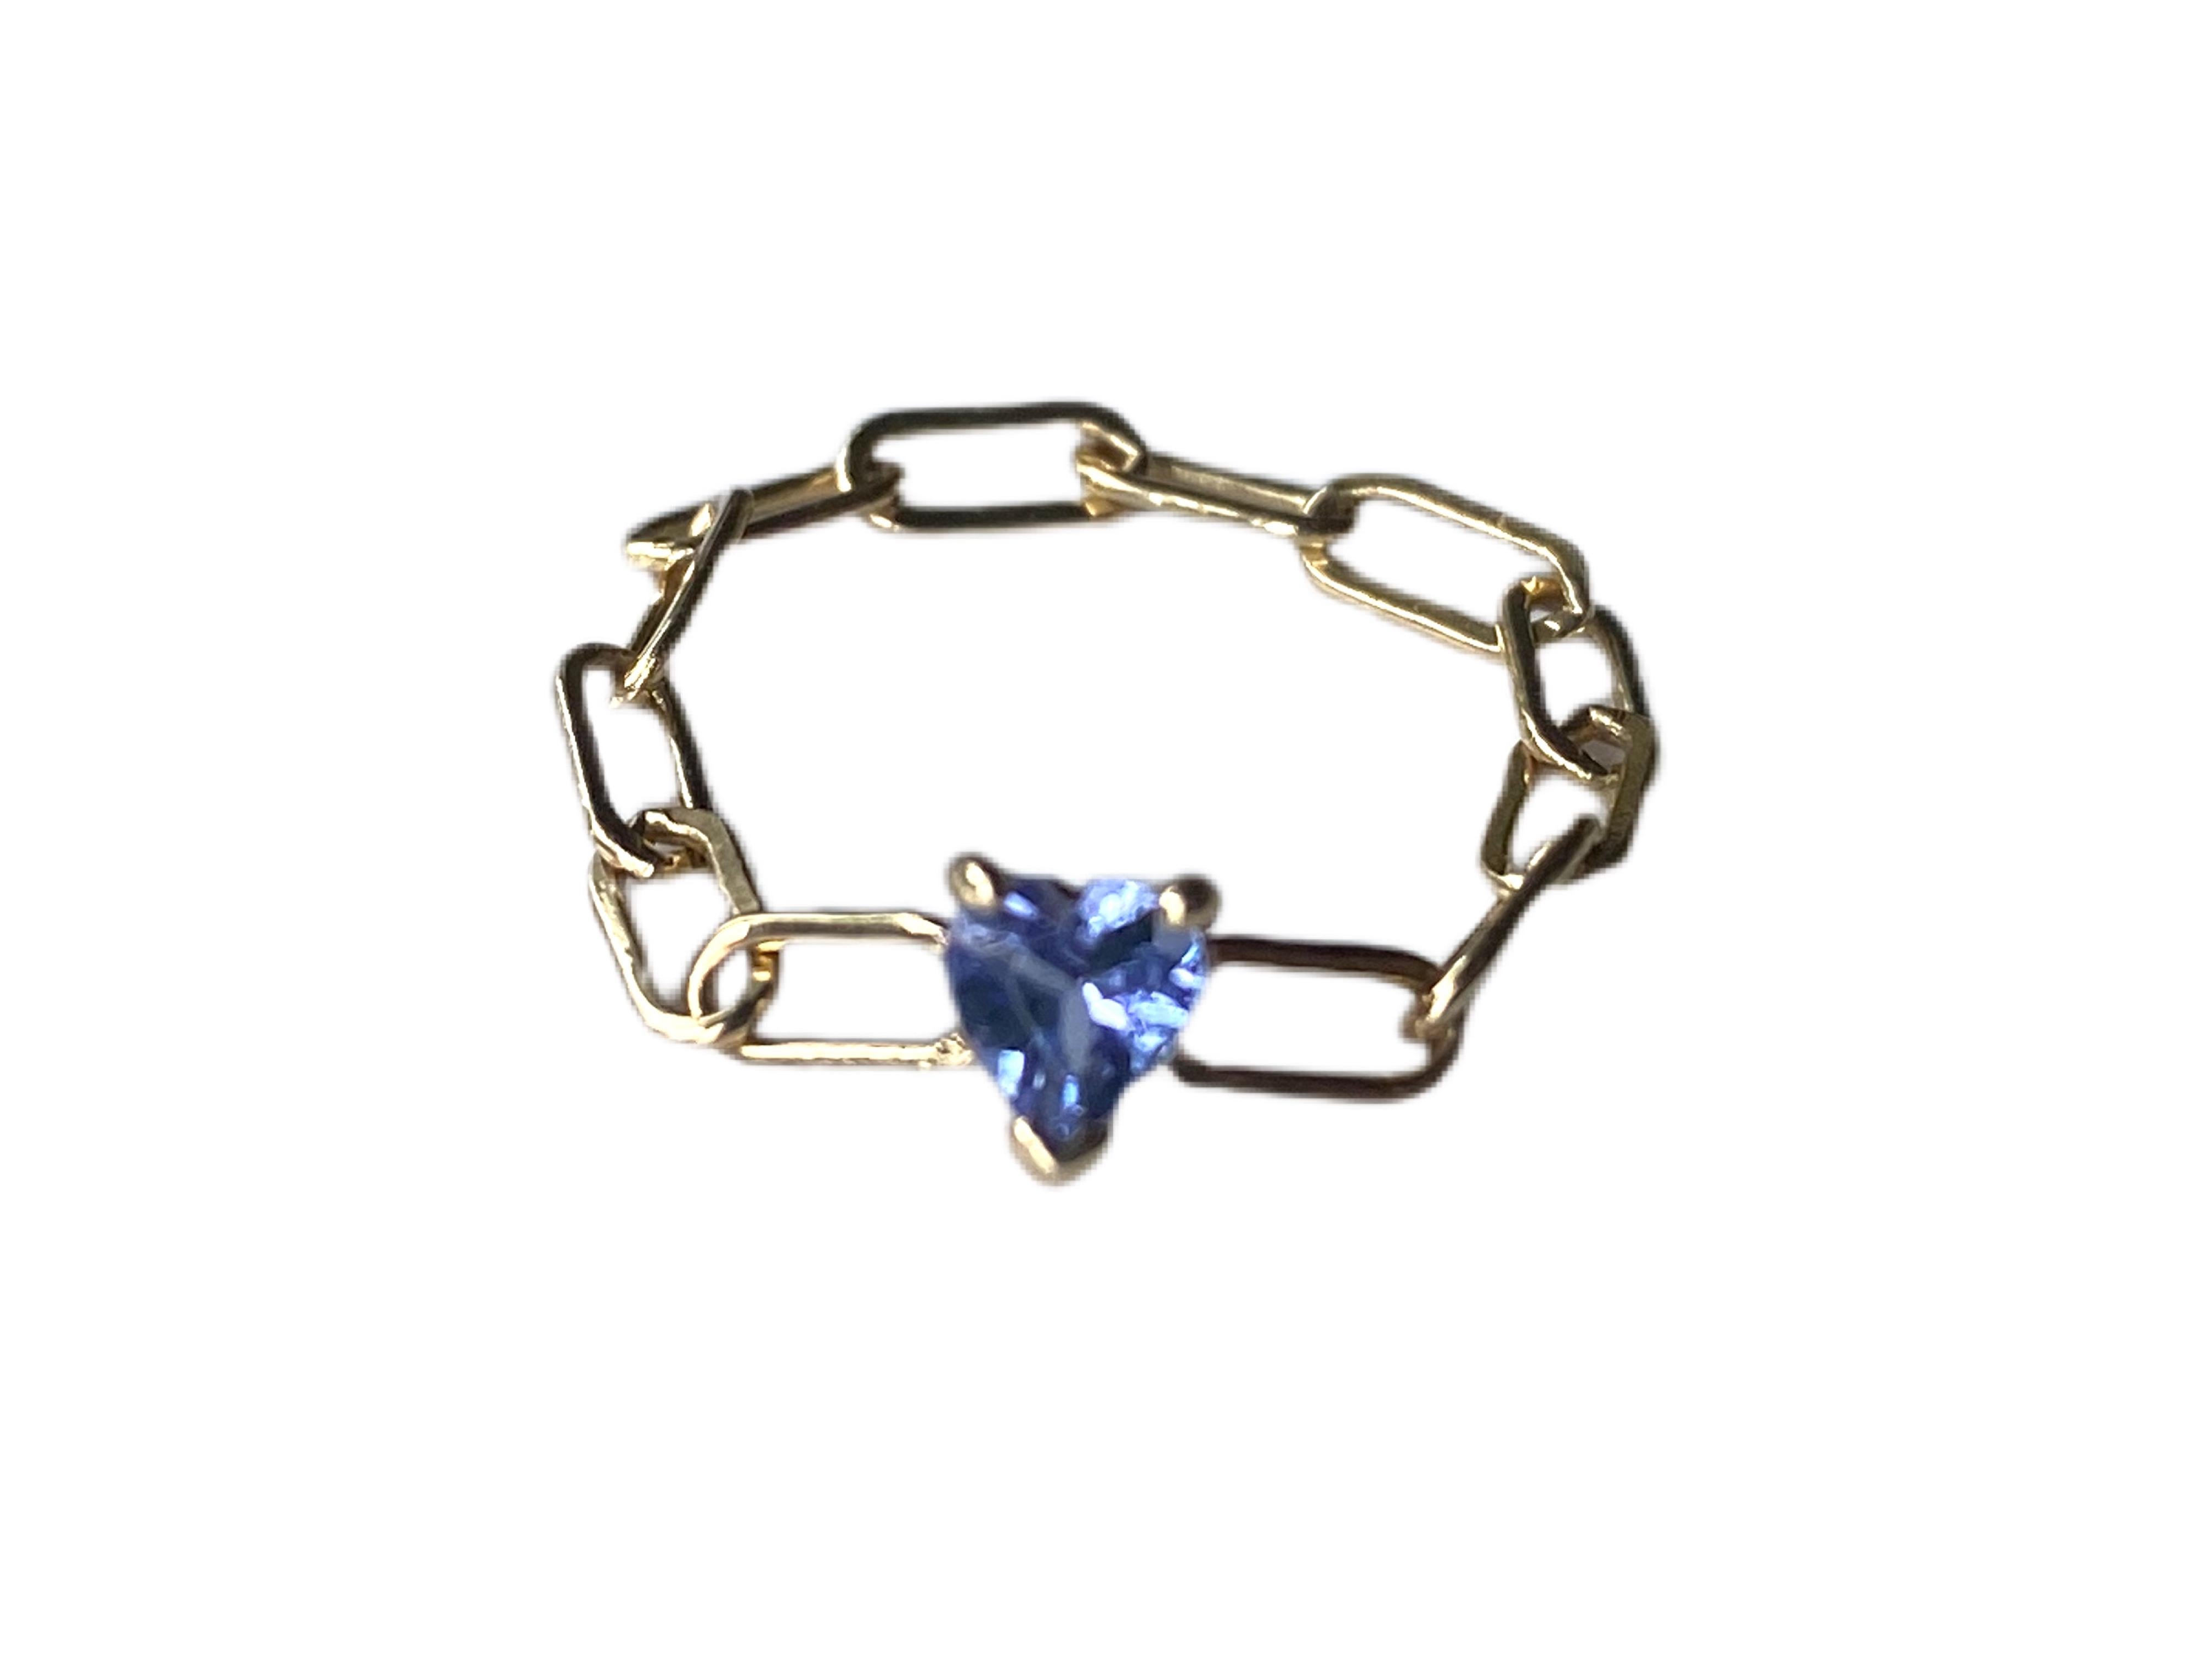 Heart Gem Ring Chain Tanzanite 14K Gold J Dauphin

J Dauphin jewelry is hand made in Los Angeles and was designed by French/ Swedish designer Johanna Dauphin. 
J Dauphin has been multiple awarded as a fashion designer and are known for her rock'n